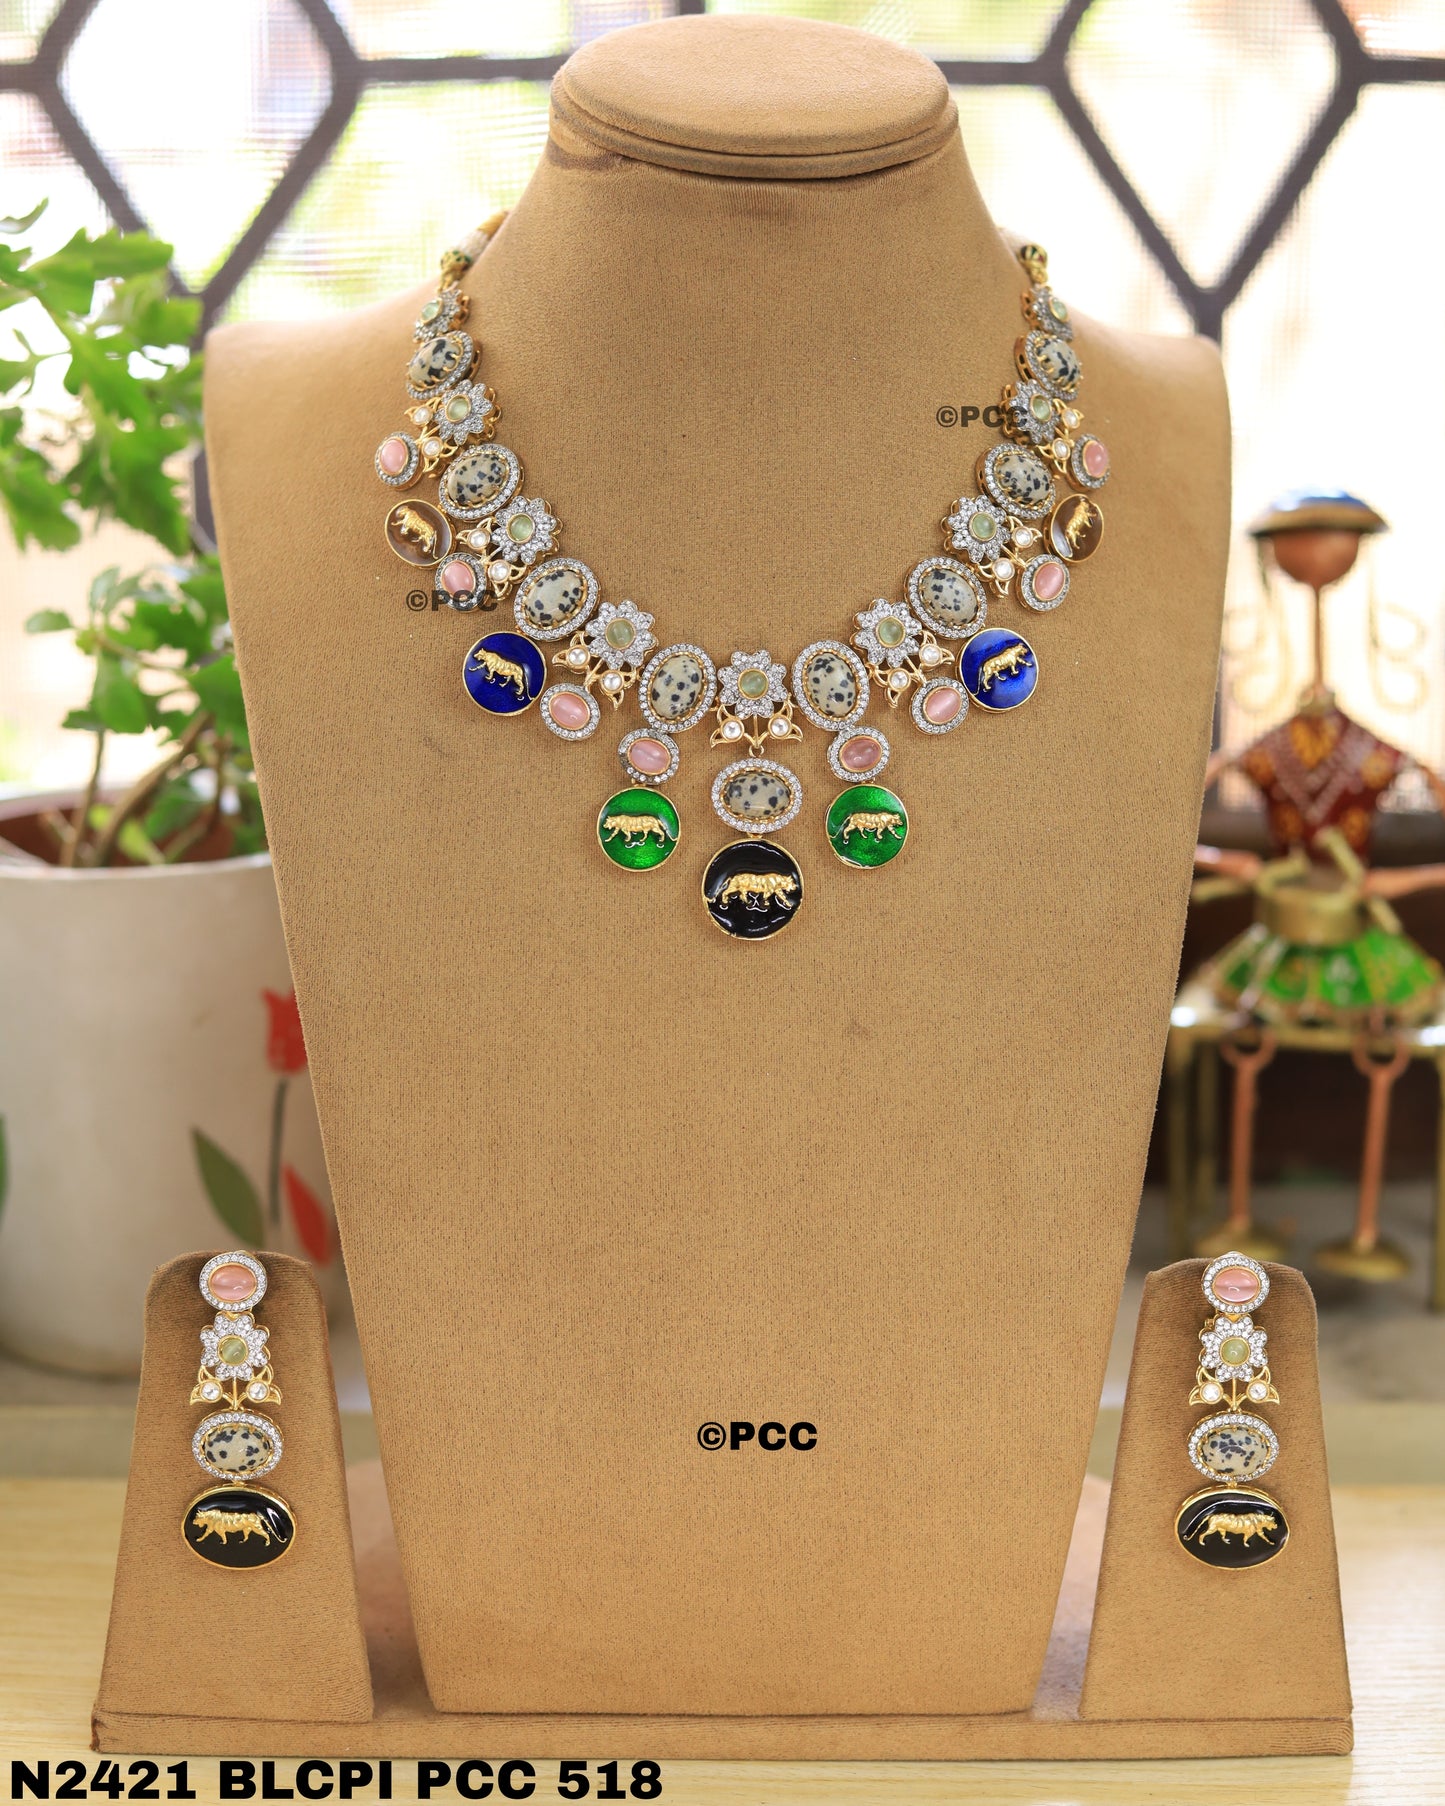 Round Neck Kundan Necklace set with Earrings.